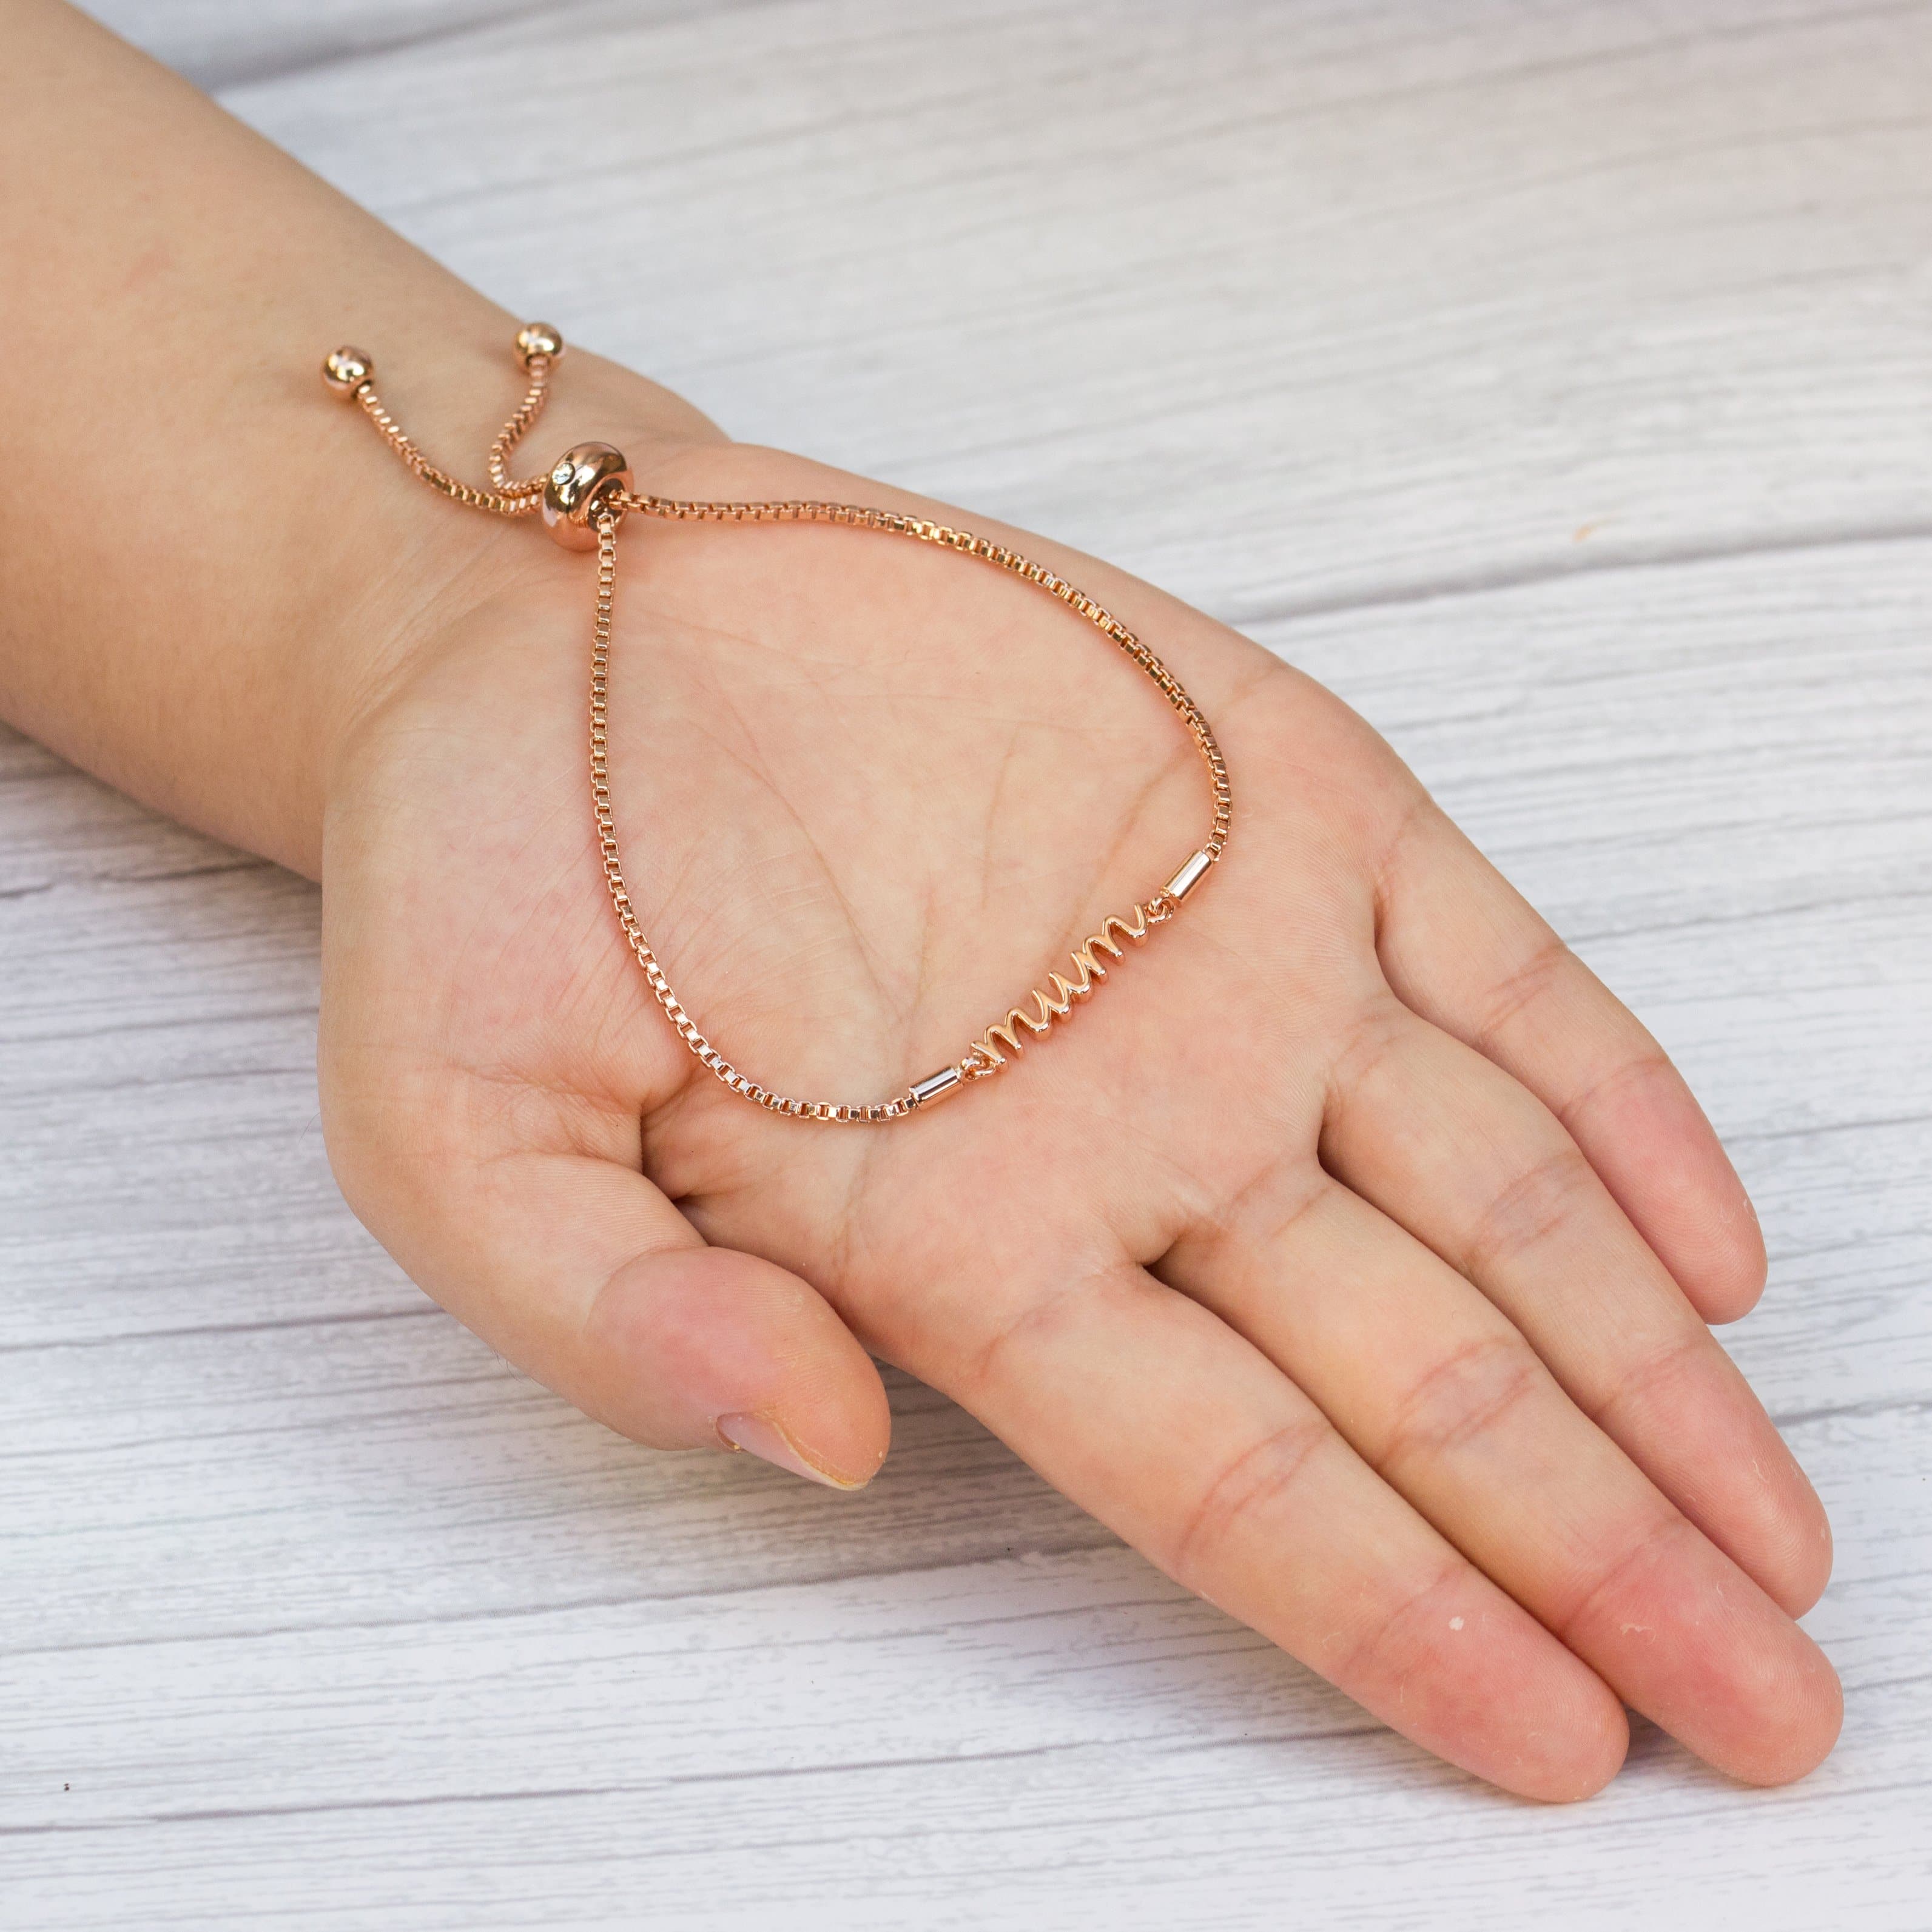 Rose Gold Plated Mum Bracelet Created with Zircondia® Crystals